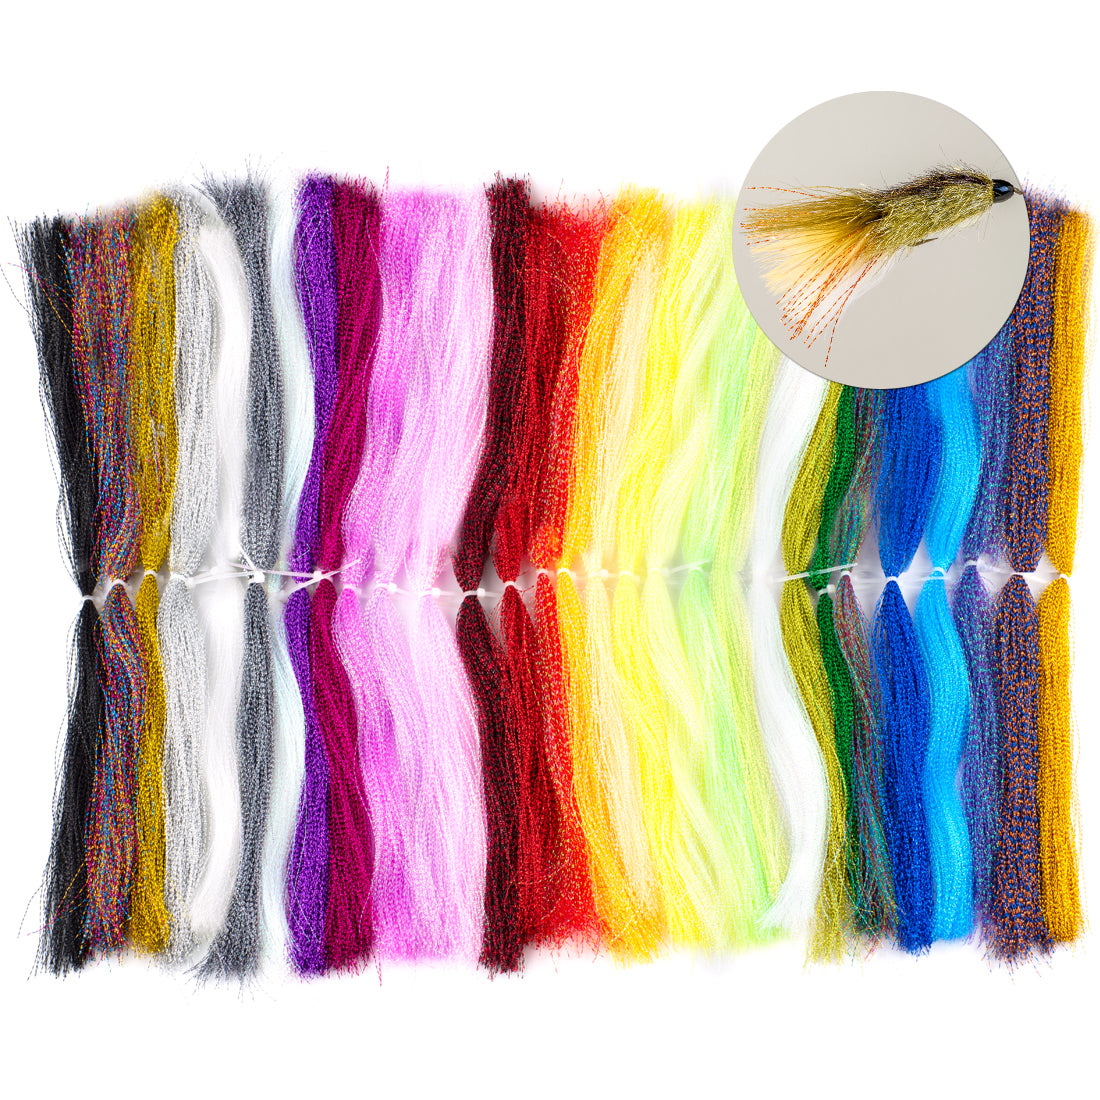 Baoblaze Colorful Crystal Flash Line Fly Tying Materials for